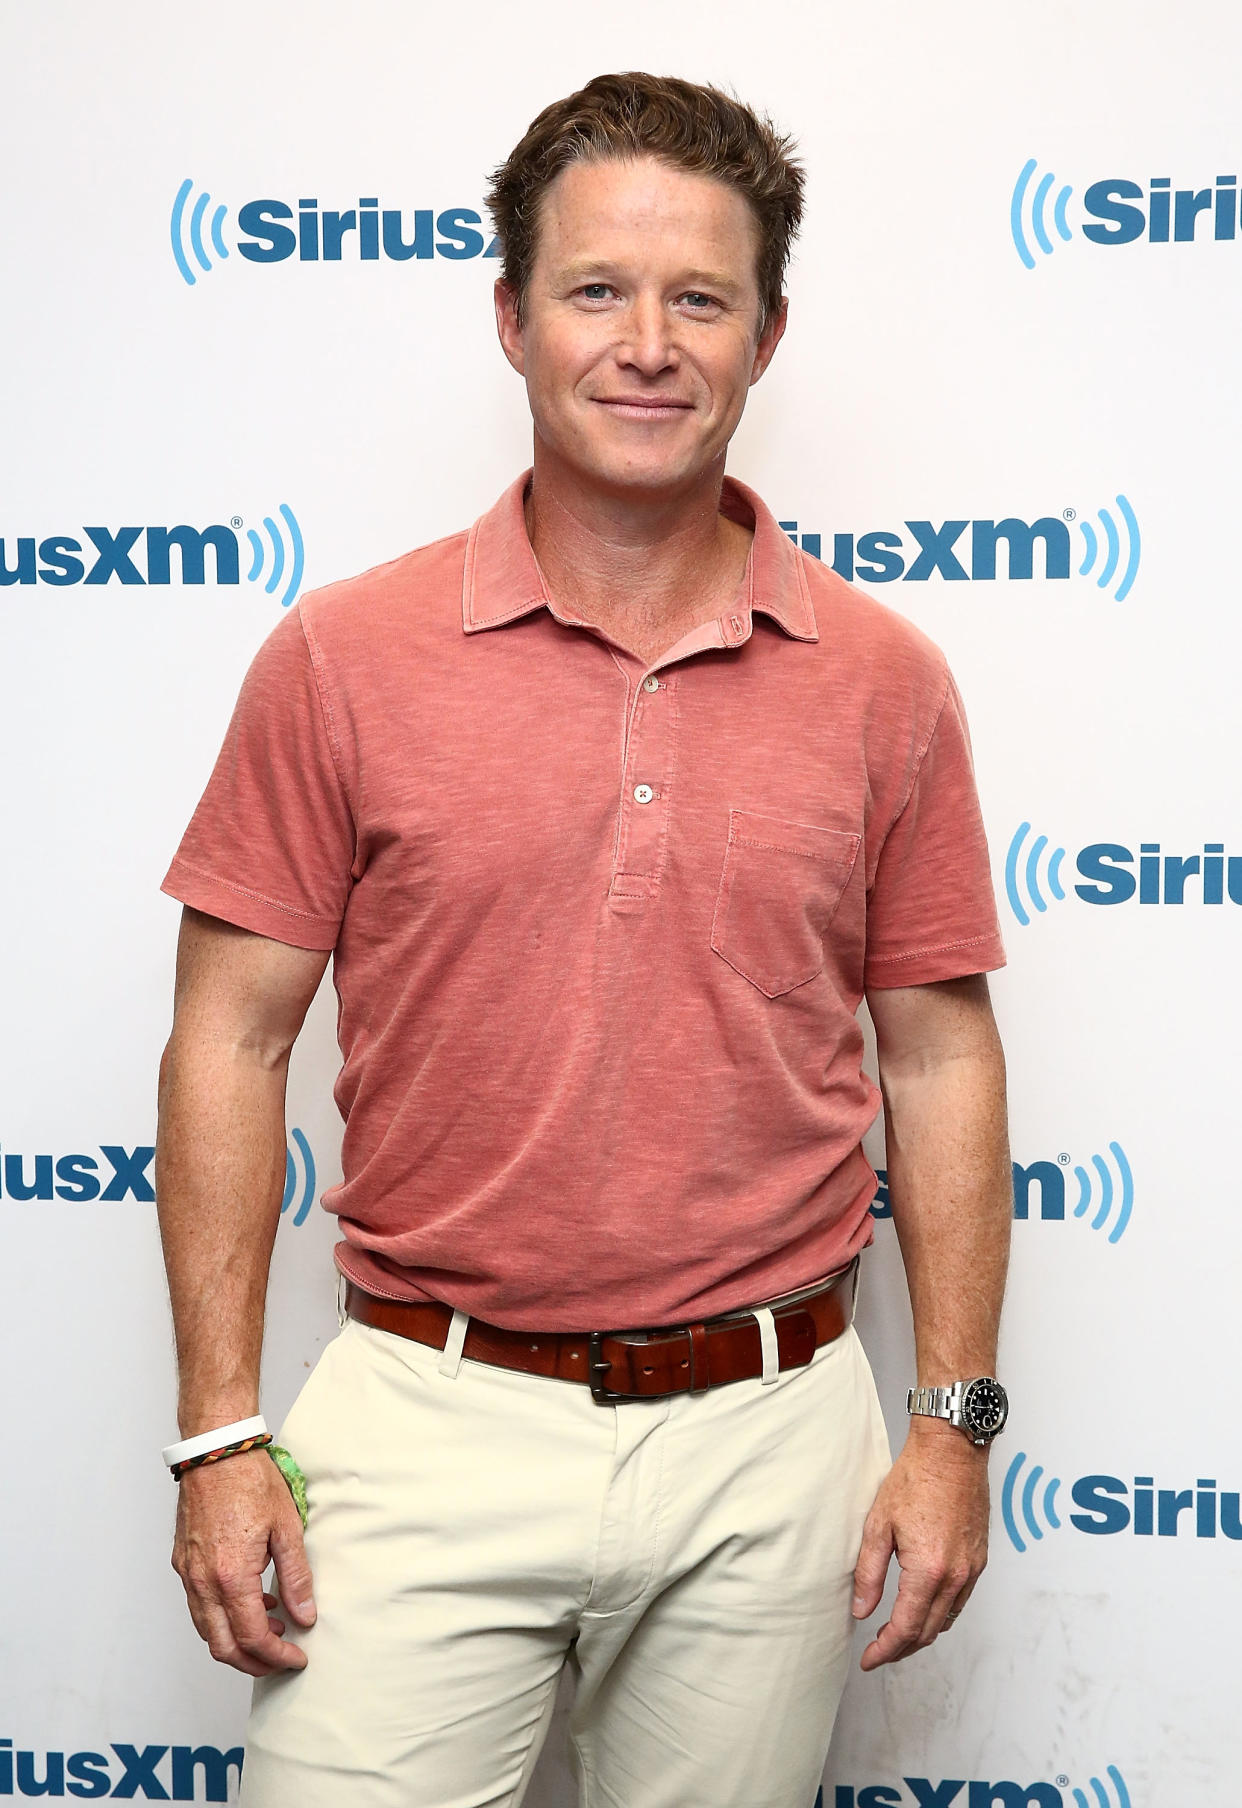 NEW YORK, NY - AUGUST 22:  (EXCLUSIVE COVERAGE)  TV personality and NBC's "Today" show co-anchor, Billy Bush visits the SiriusXM Studios on August 22, 2016 in New York City.  (Photo by Astrid Stawiarz/Getty Images)